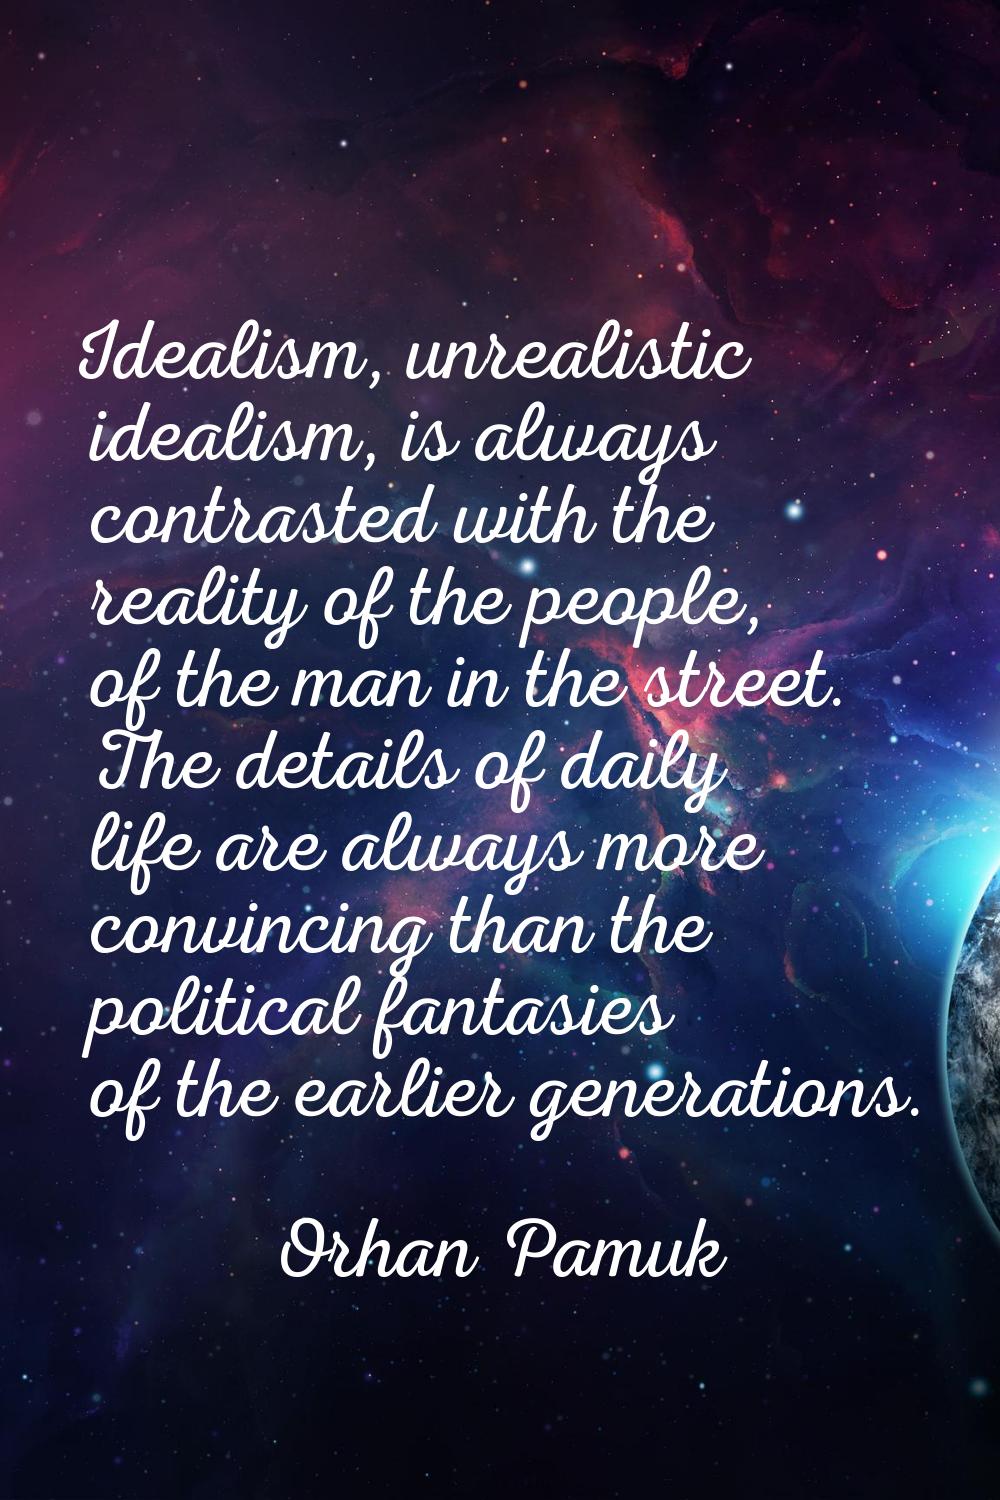 Idealism, unrealistic idealism, is always contrasted with the reality of the people, of the man in 